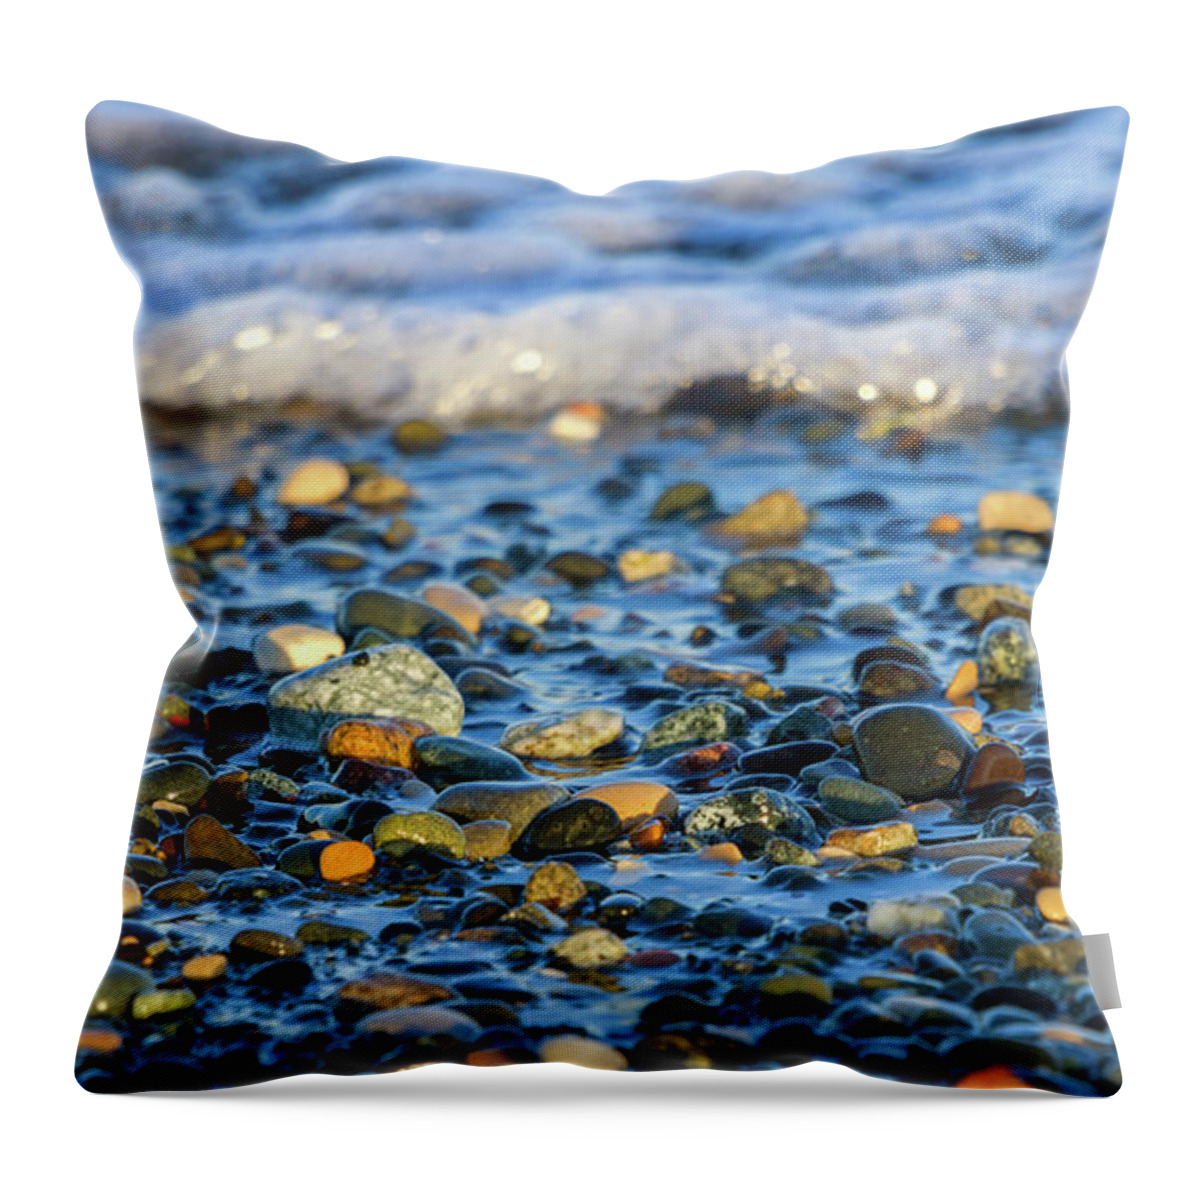 Stone Throw Pillow featuring the photograph Pebbles by Stelios Kleanthous